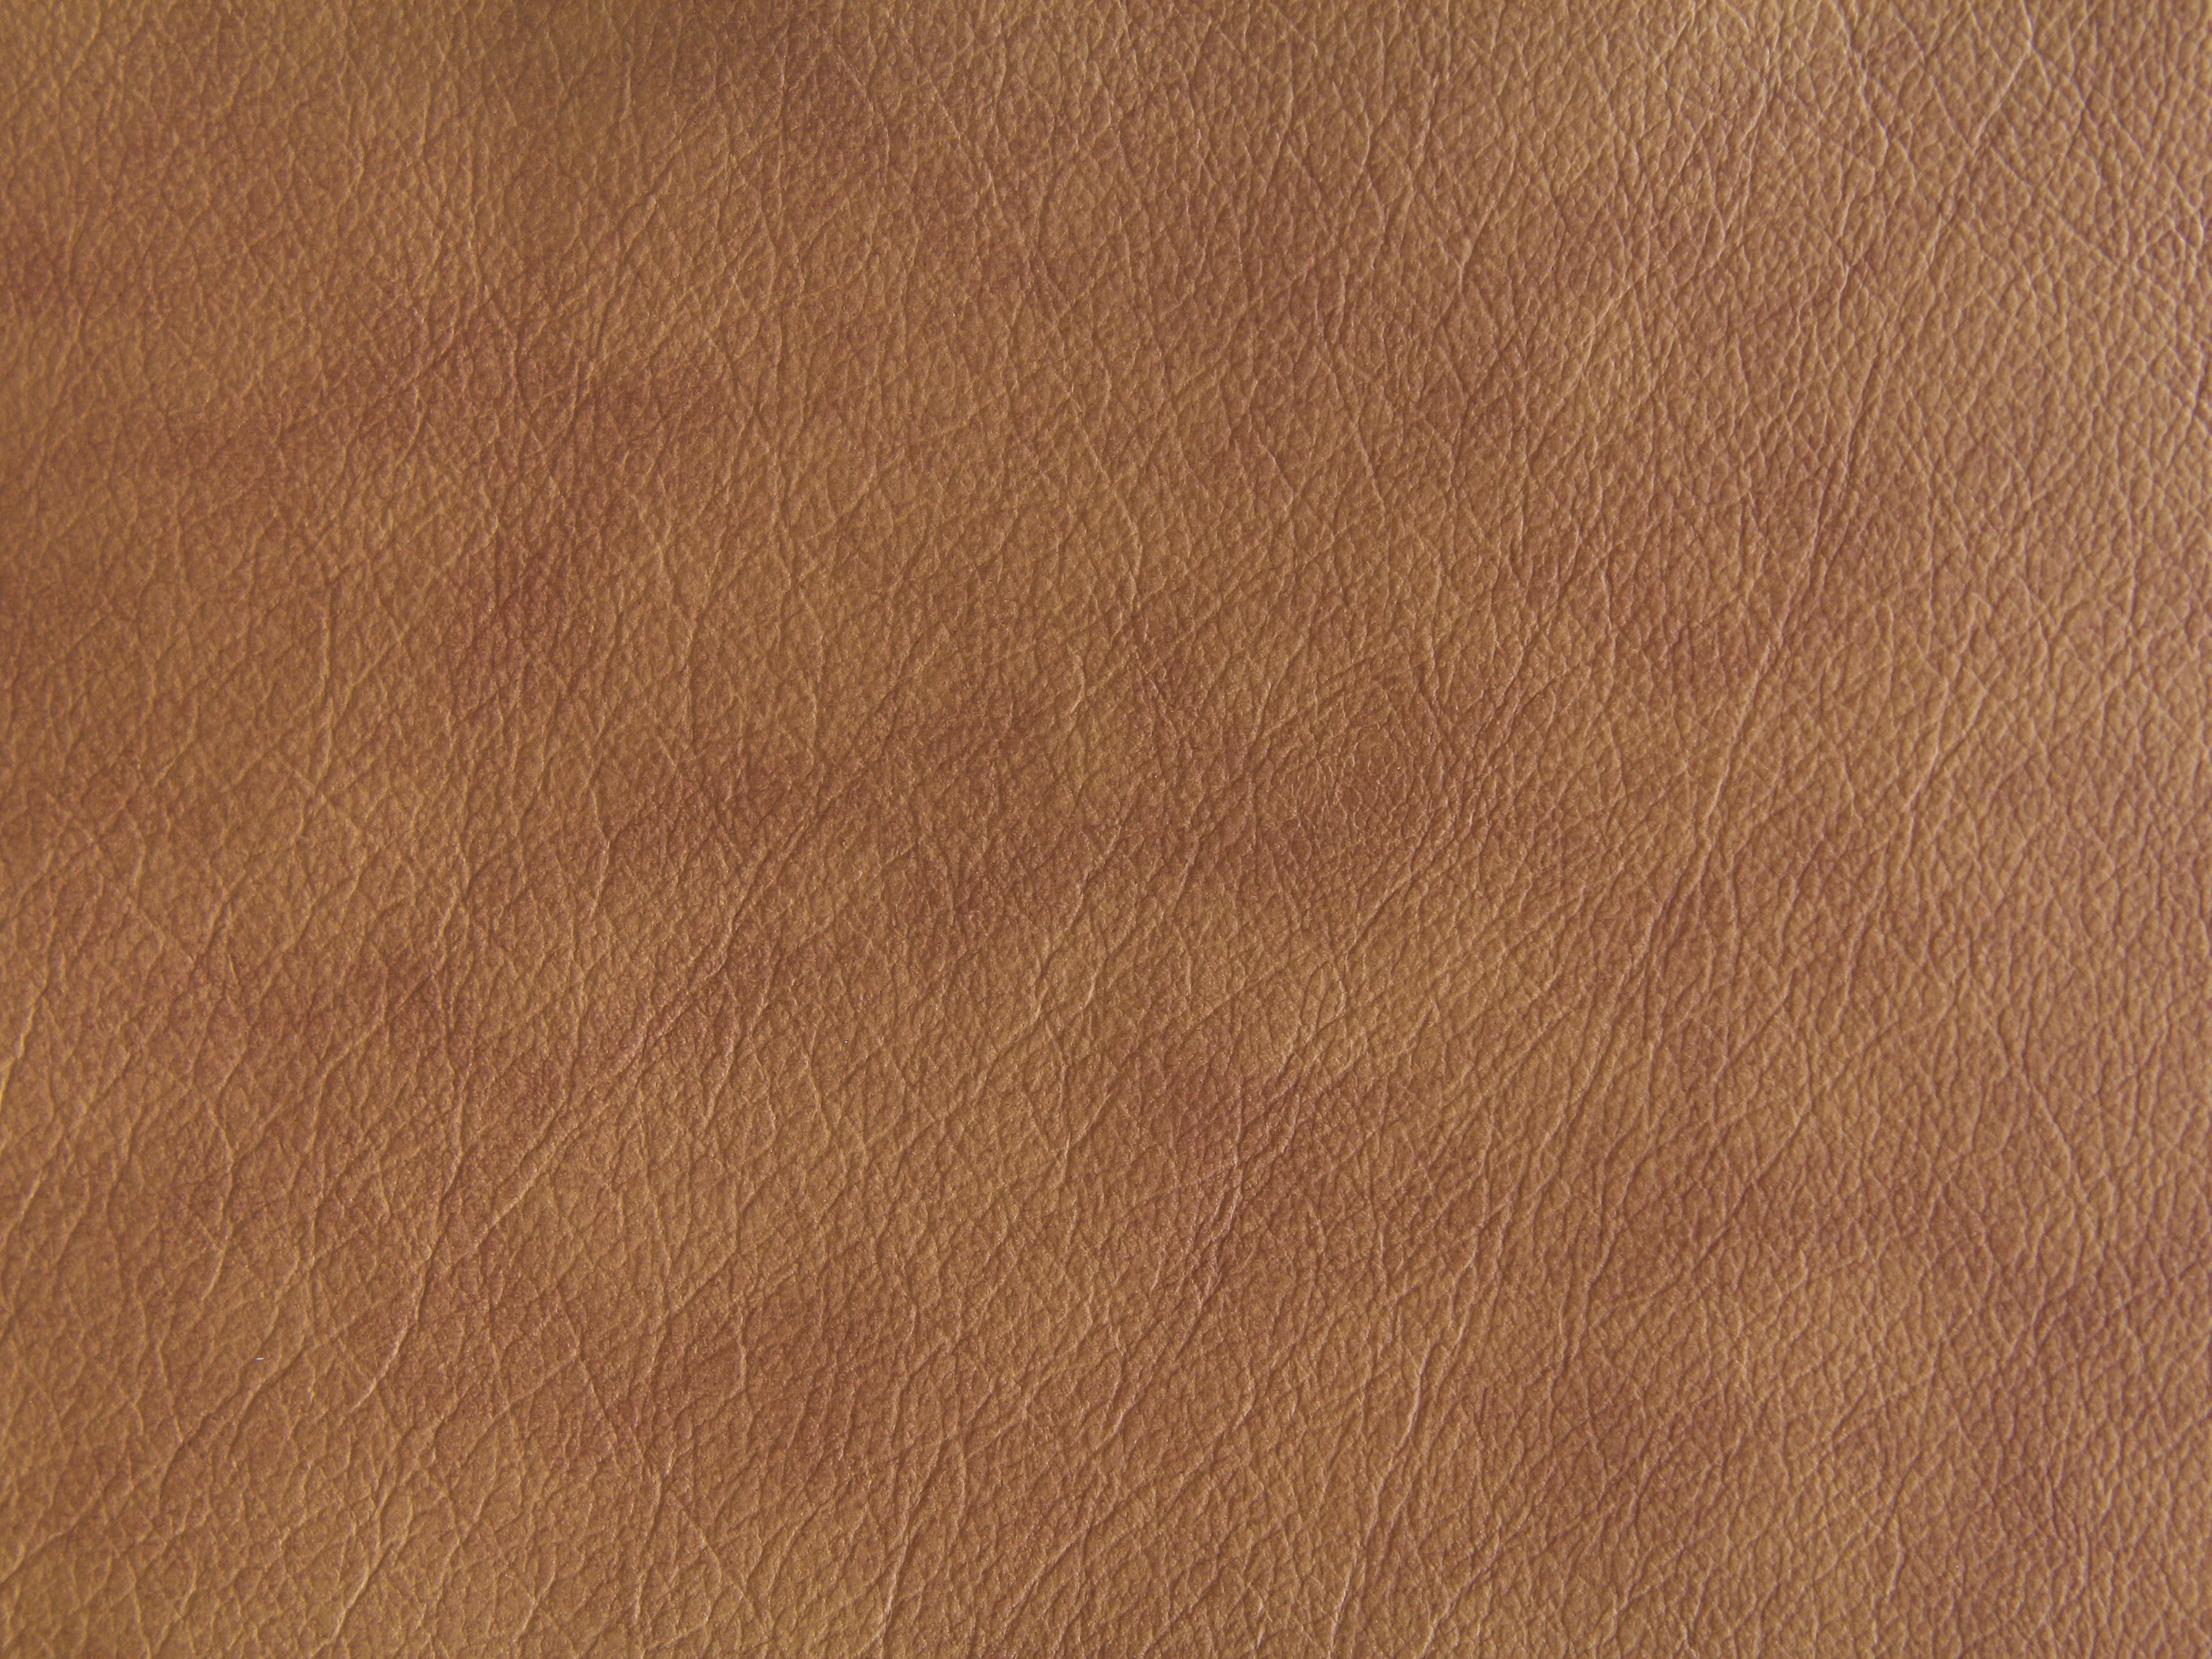 Coudy Brown Leather Texture Wallpaper Fabric Stock Image HD Wallpapers Download Free Map Images Wallpaper [wallpaper684.blogspot.com]